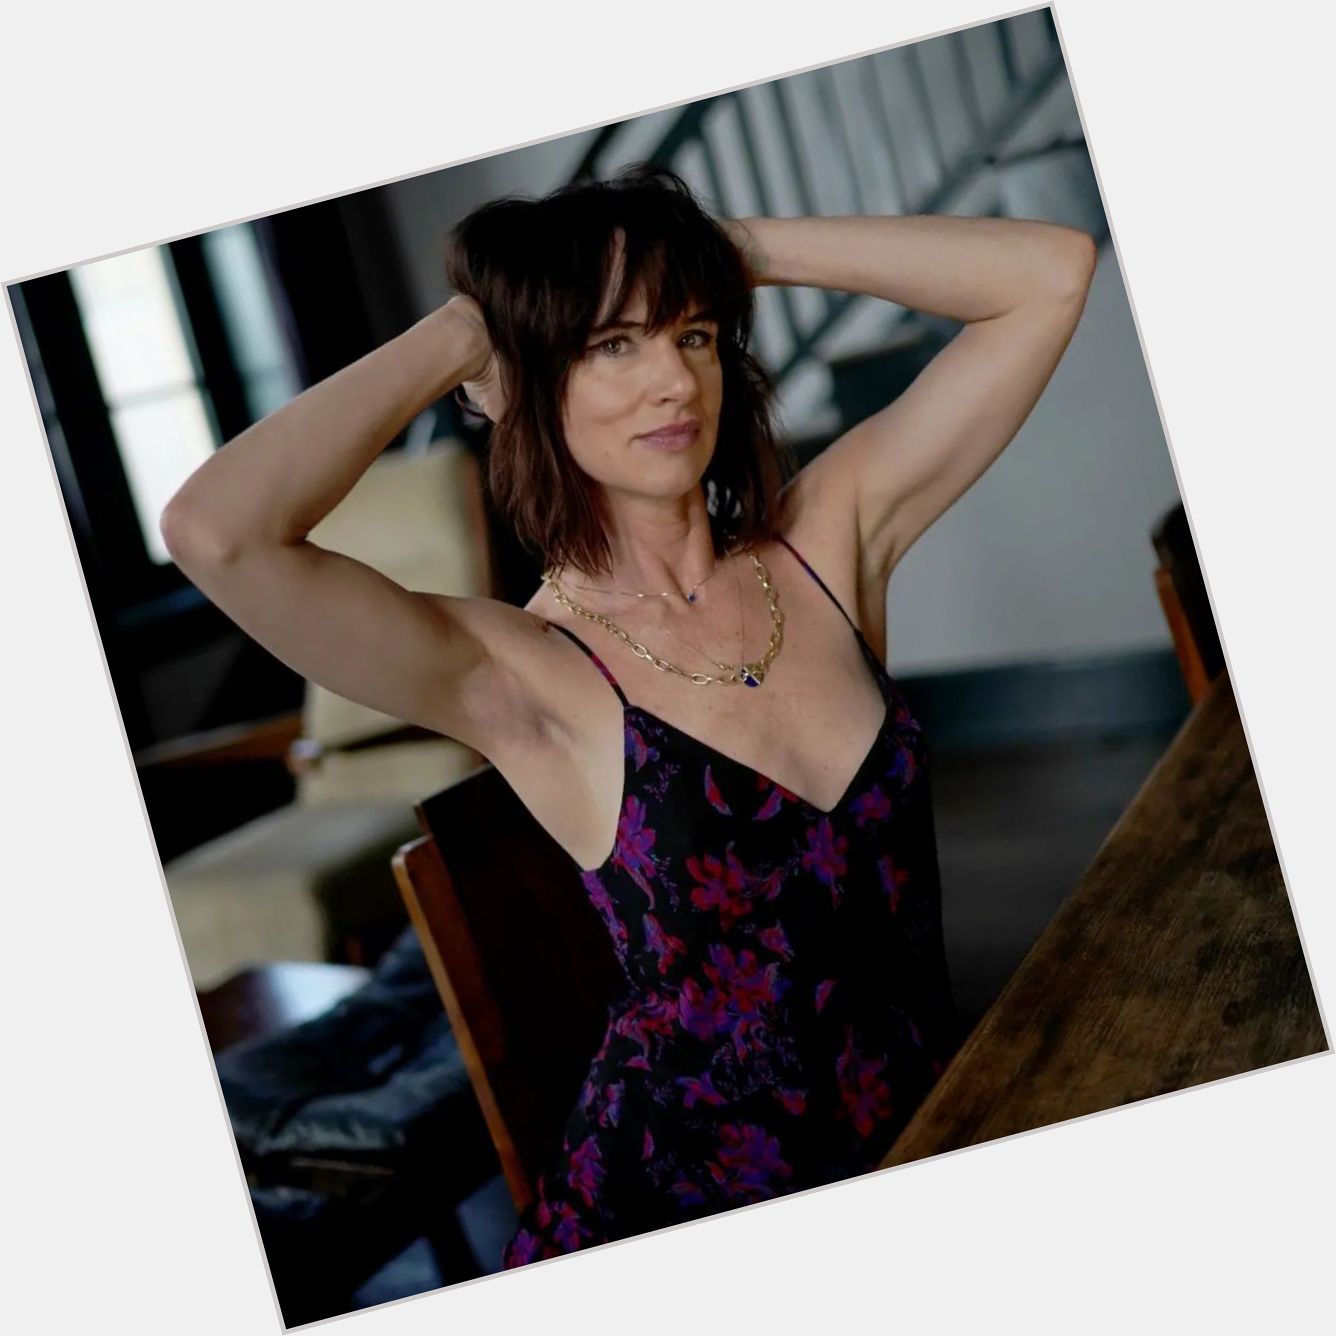 Happy 50th Birthday to actress and singer Juliette Lewis Born: June 21, 1973 